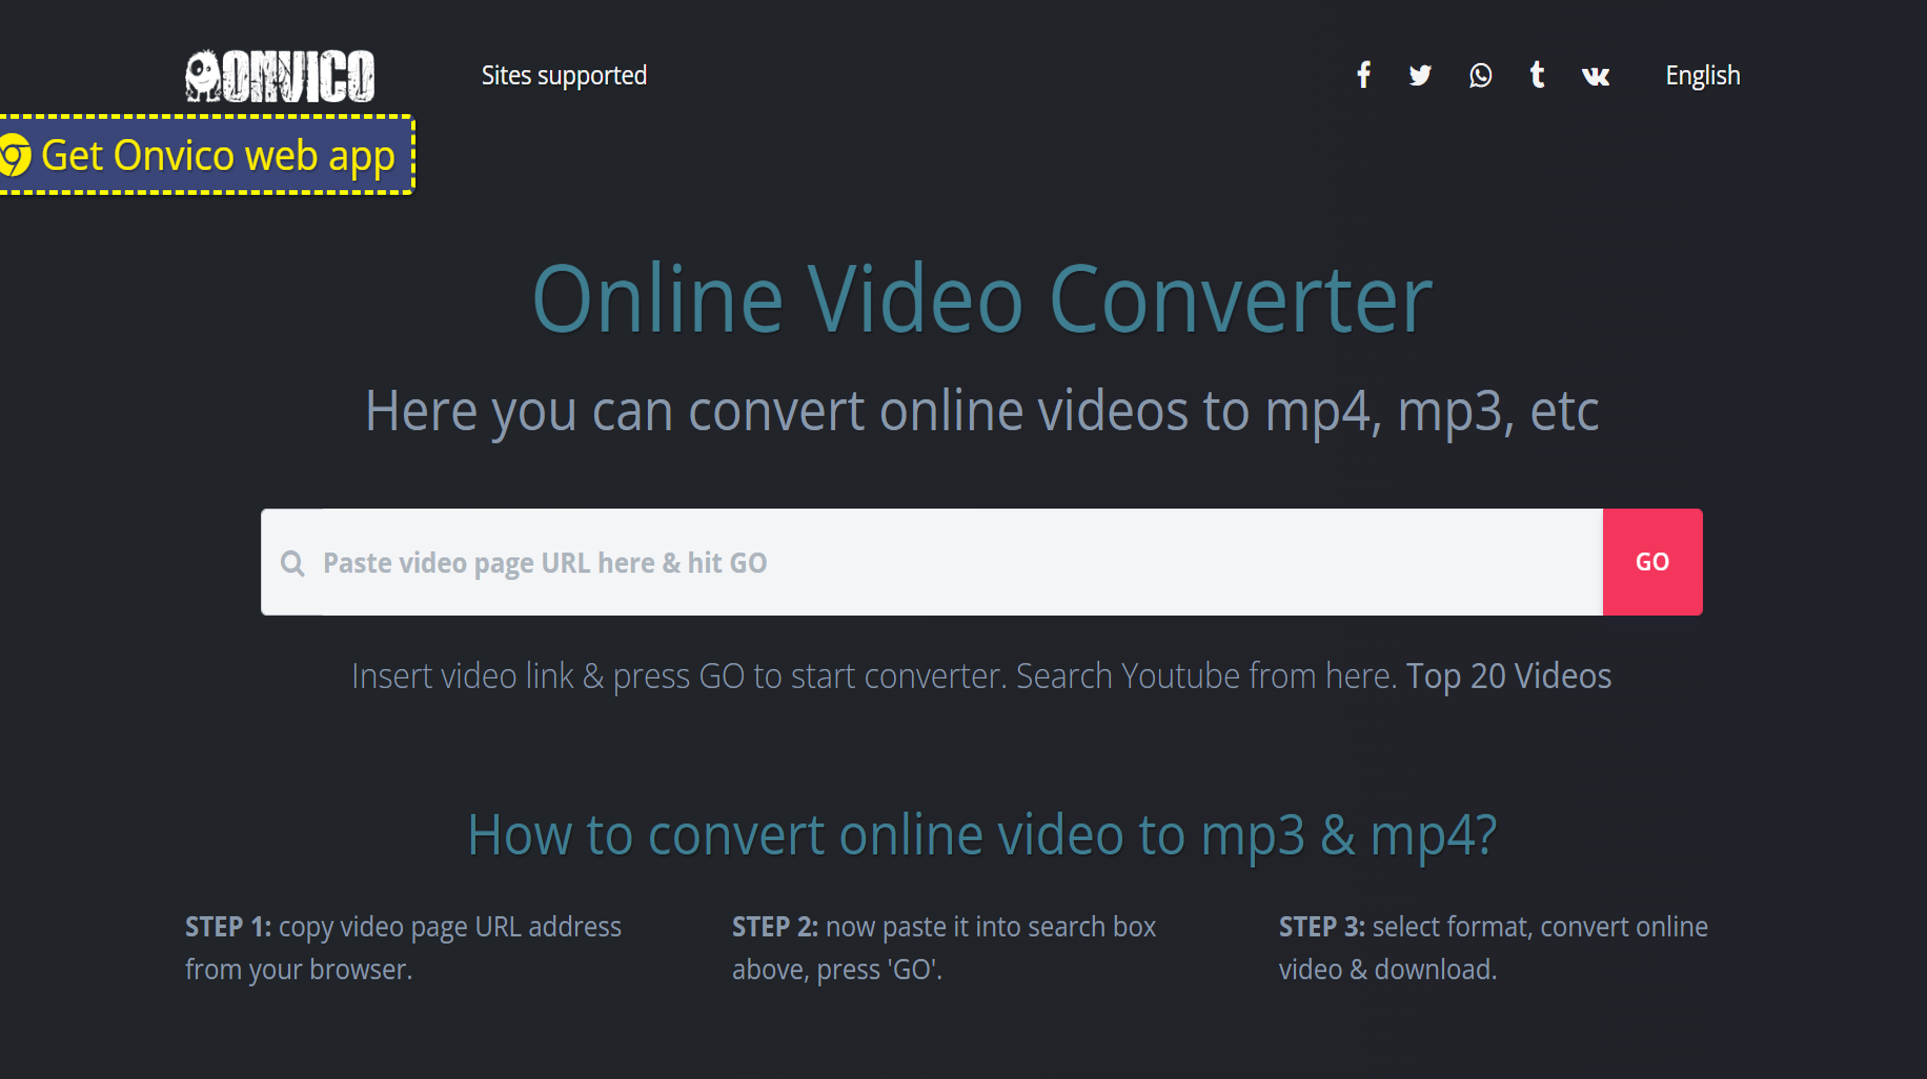 Convert YouTube videos to MP3 files without any hassle with our easy-to-use YouTube to MP3 converters